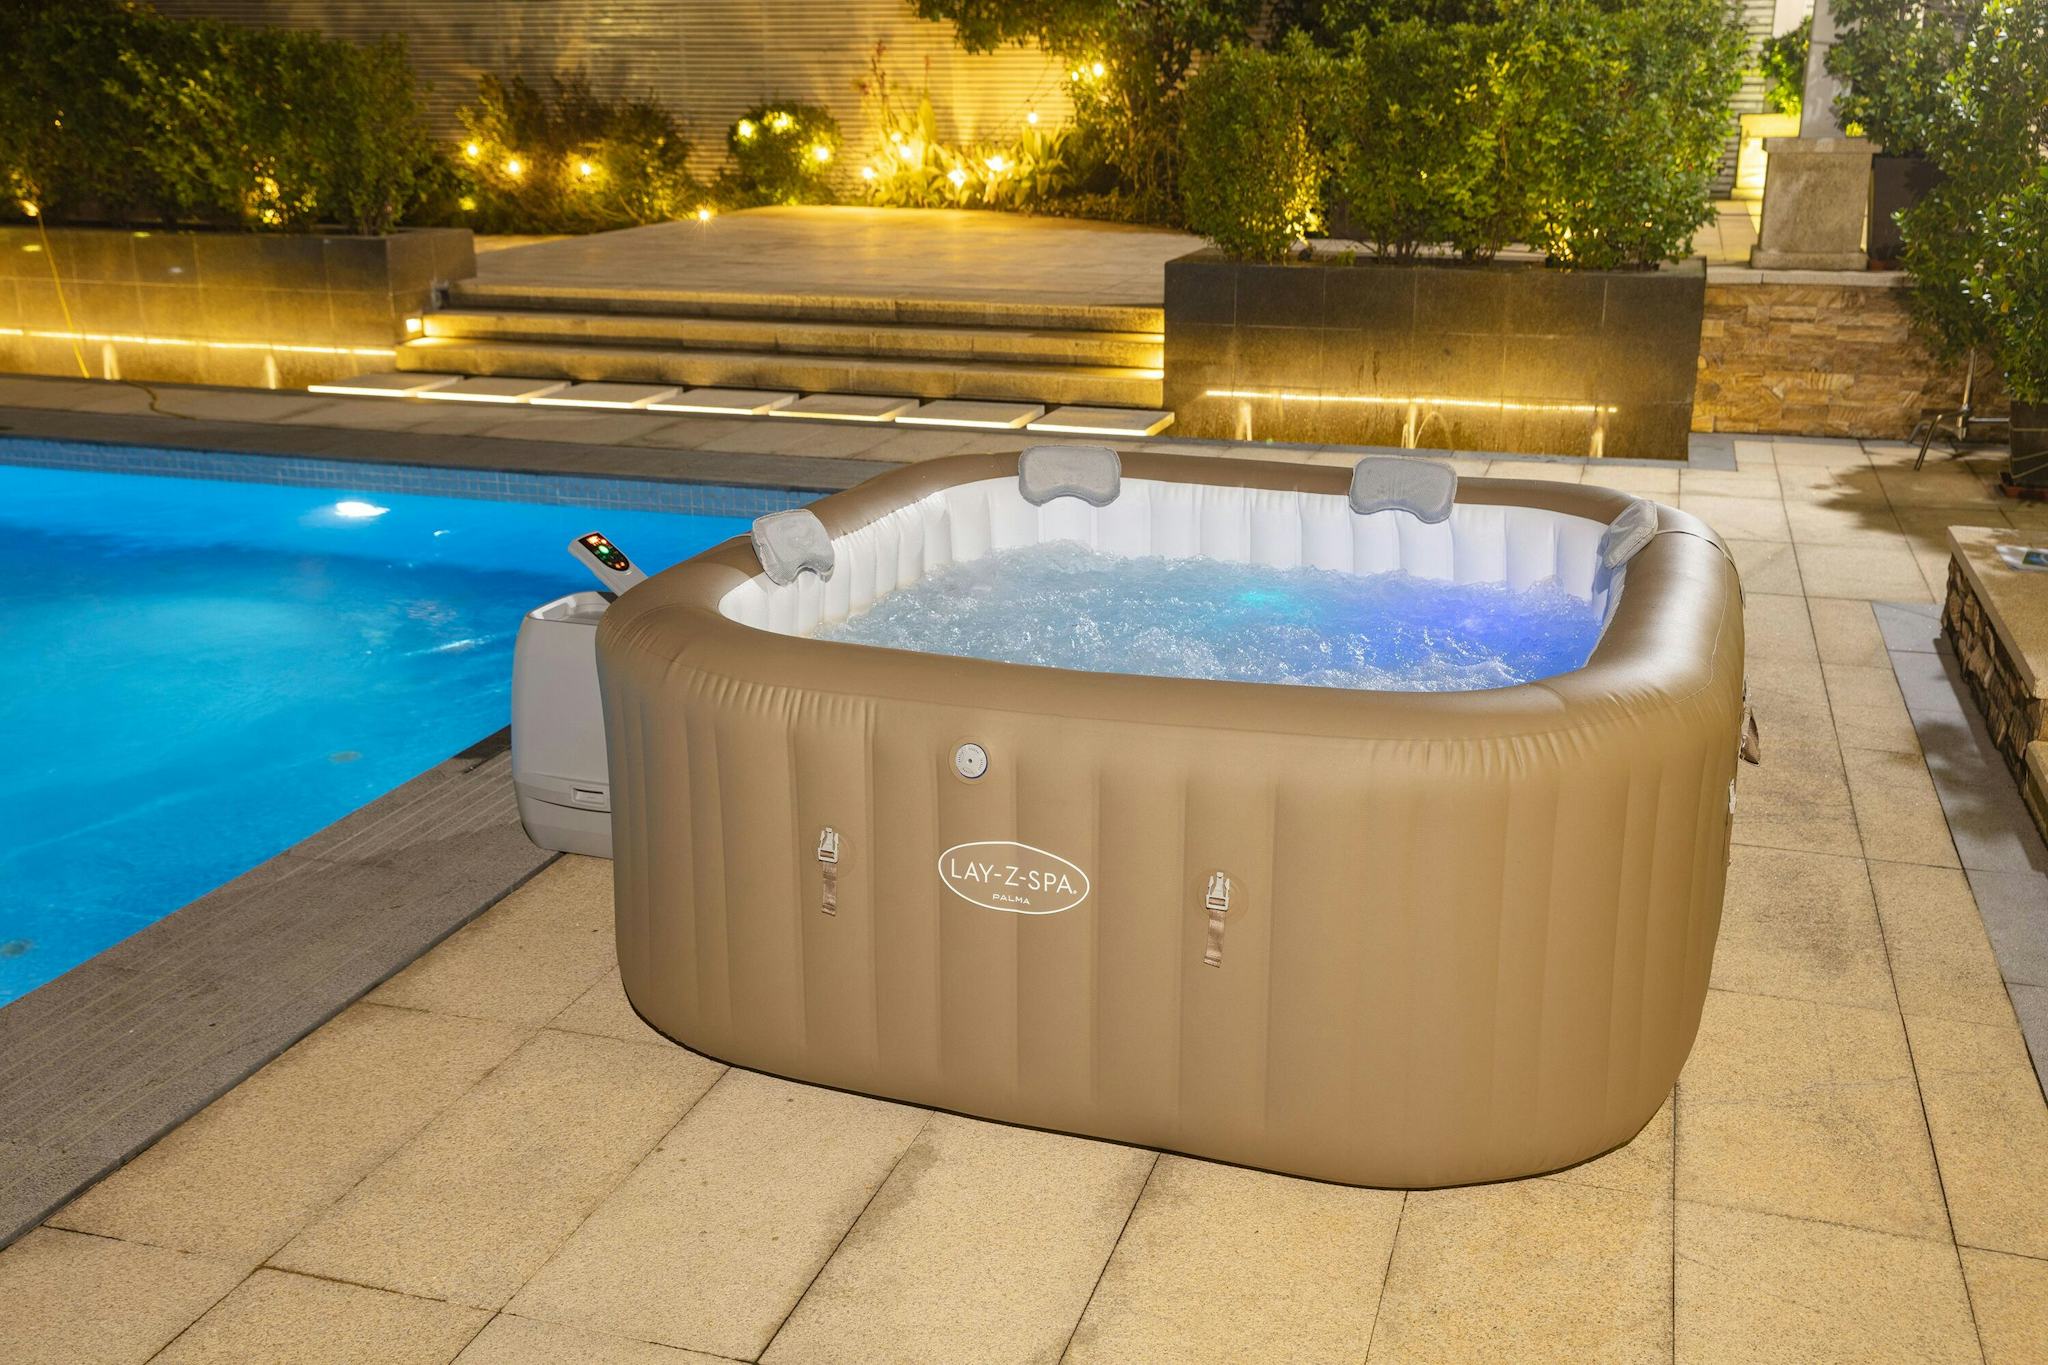 Spas Gonflables Spa gonflable carré Lay-Z-Spa® Palma Hydrojet Pro™ 5 - 7 places Bestway 6